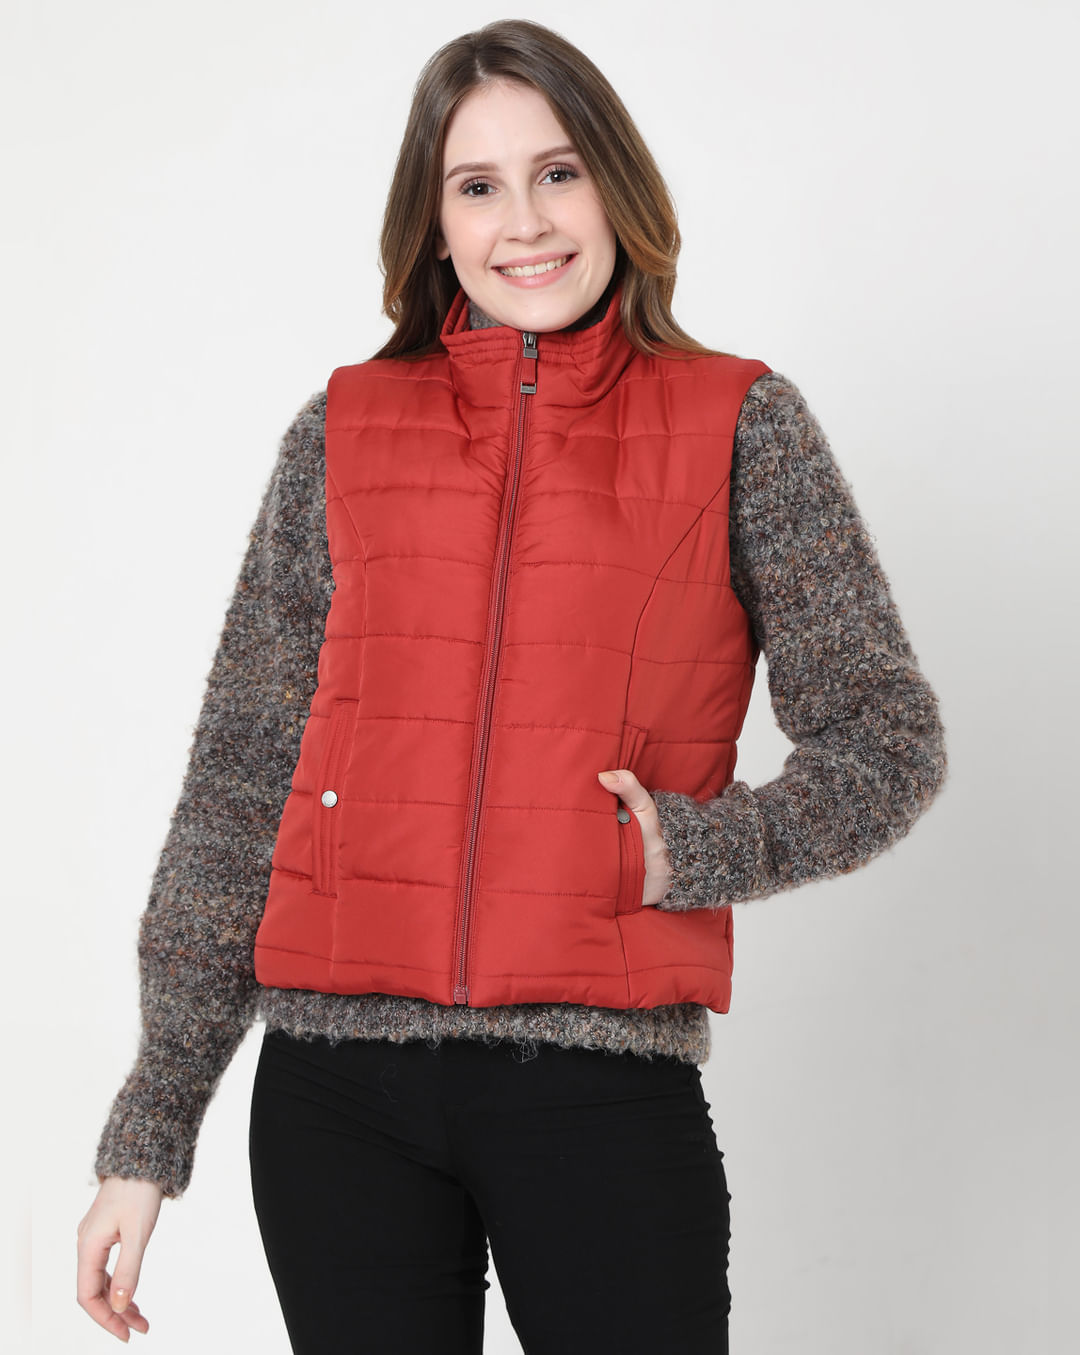 25 Ways To Wear Puffer Vests For Women 2021  Red puffer vest, White puffer  vest, Puffer vest fashion